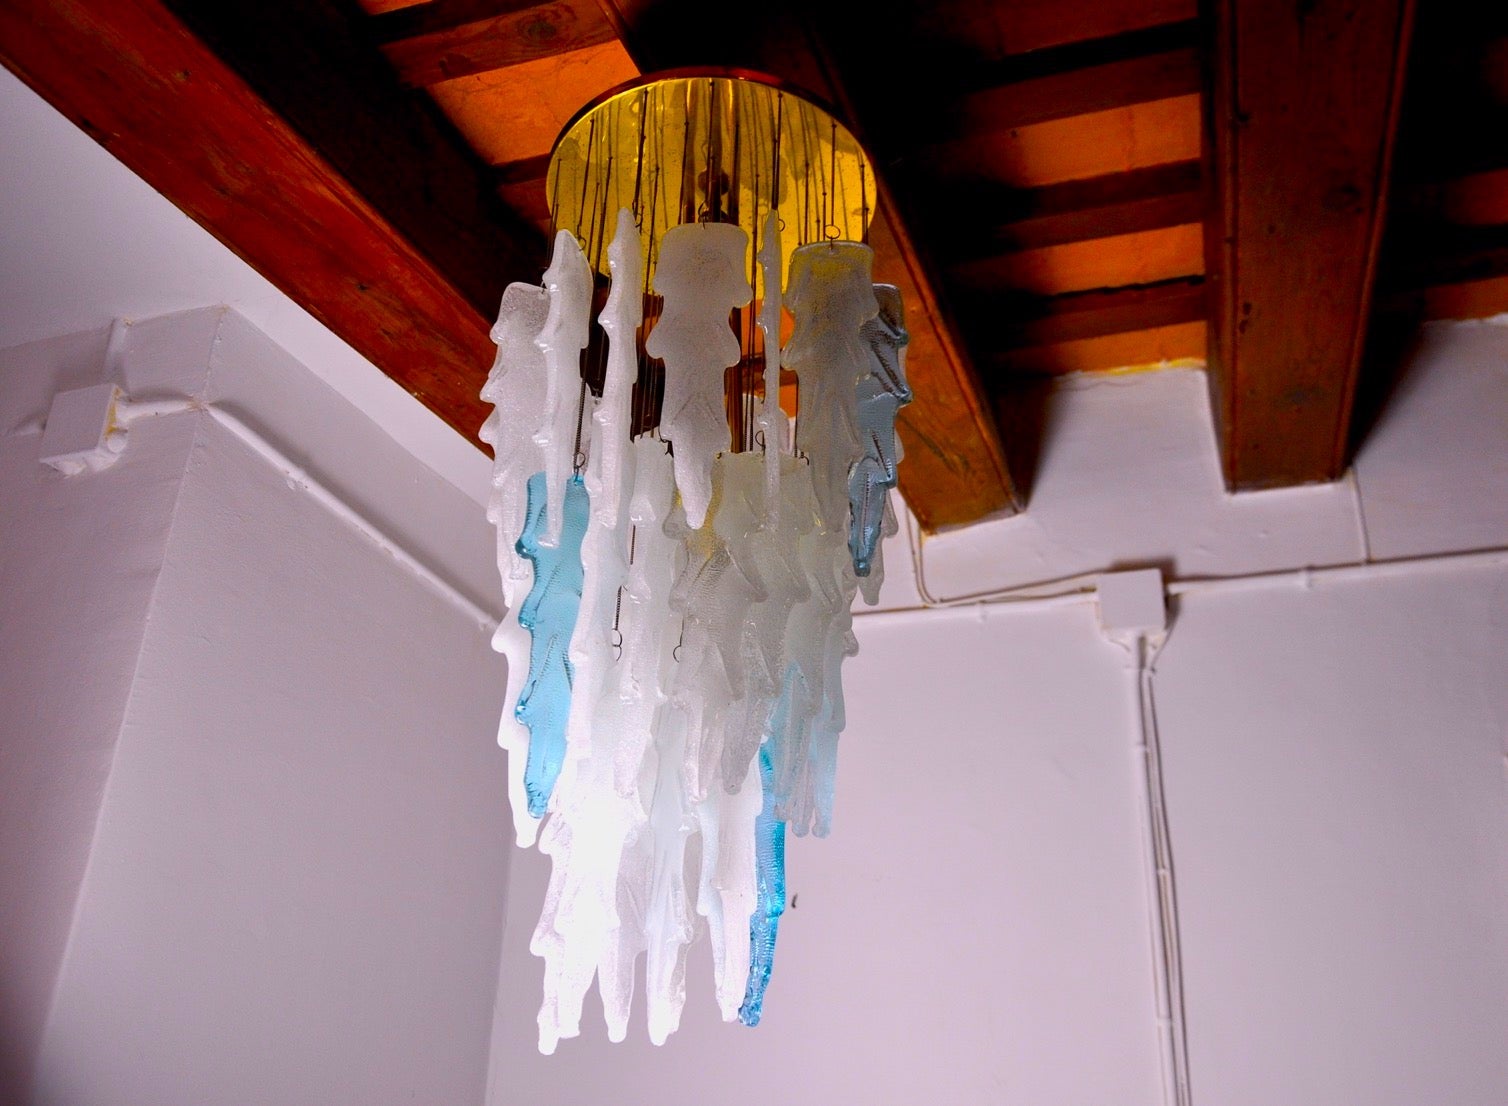 Hollywood Regency Albano Poli Poliarte Waterfall Suspension, 1970, Murano Italy For Sale